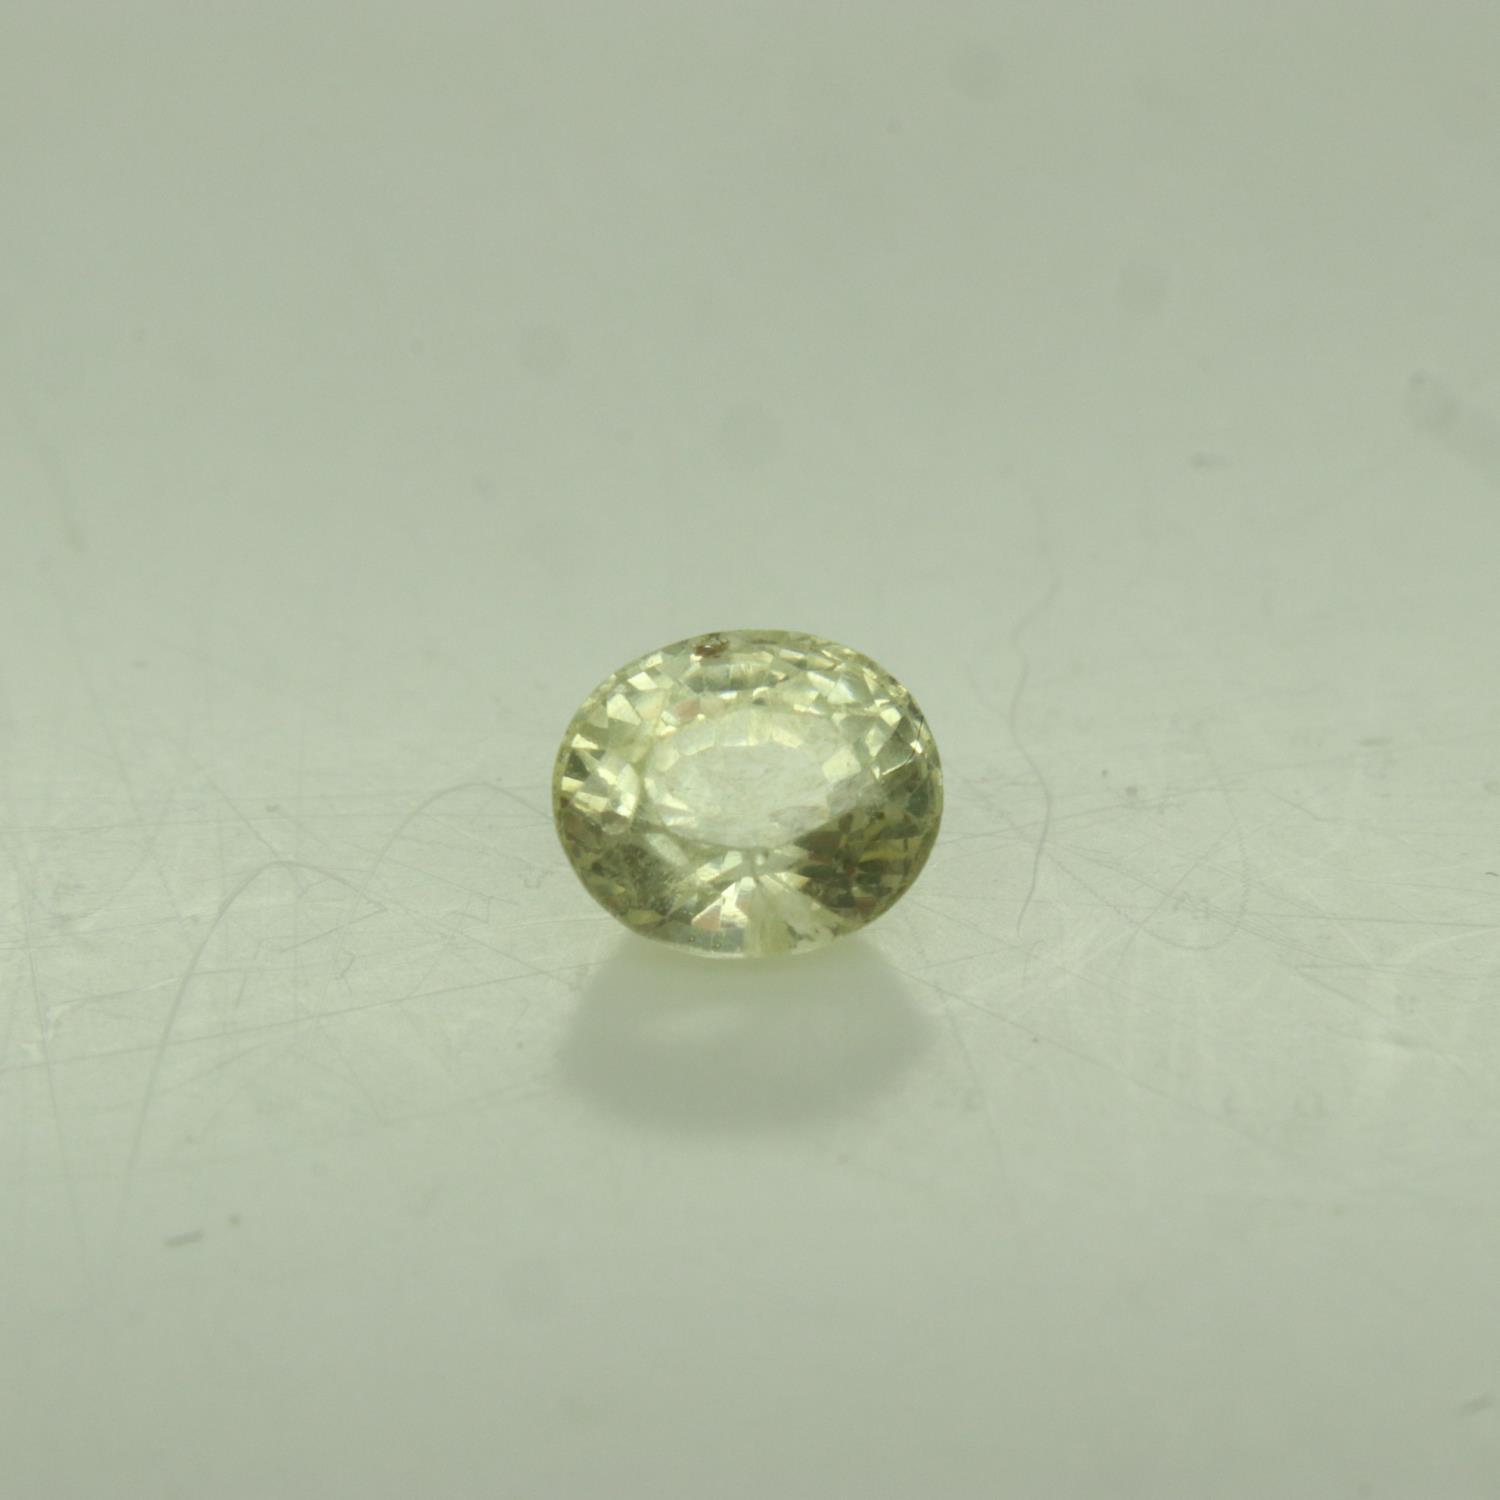 Natural loose oval cut yellow sapphire; 1.11cts. UK P&P Group 0 (£6+VAT for the first lot and £1+VAT